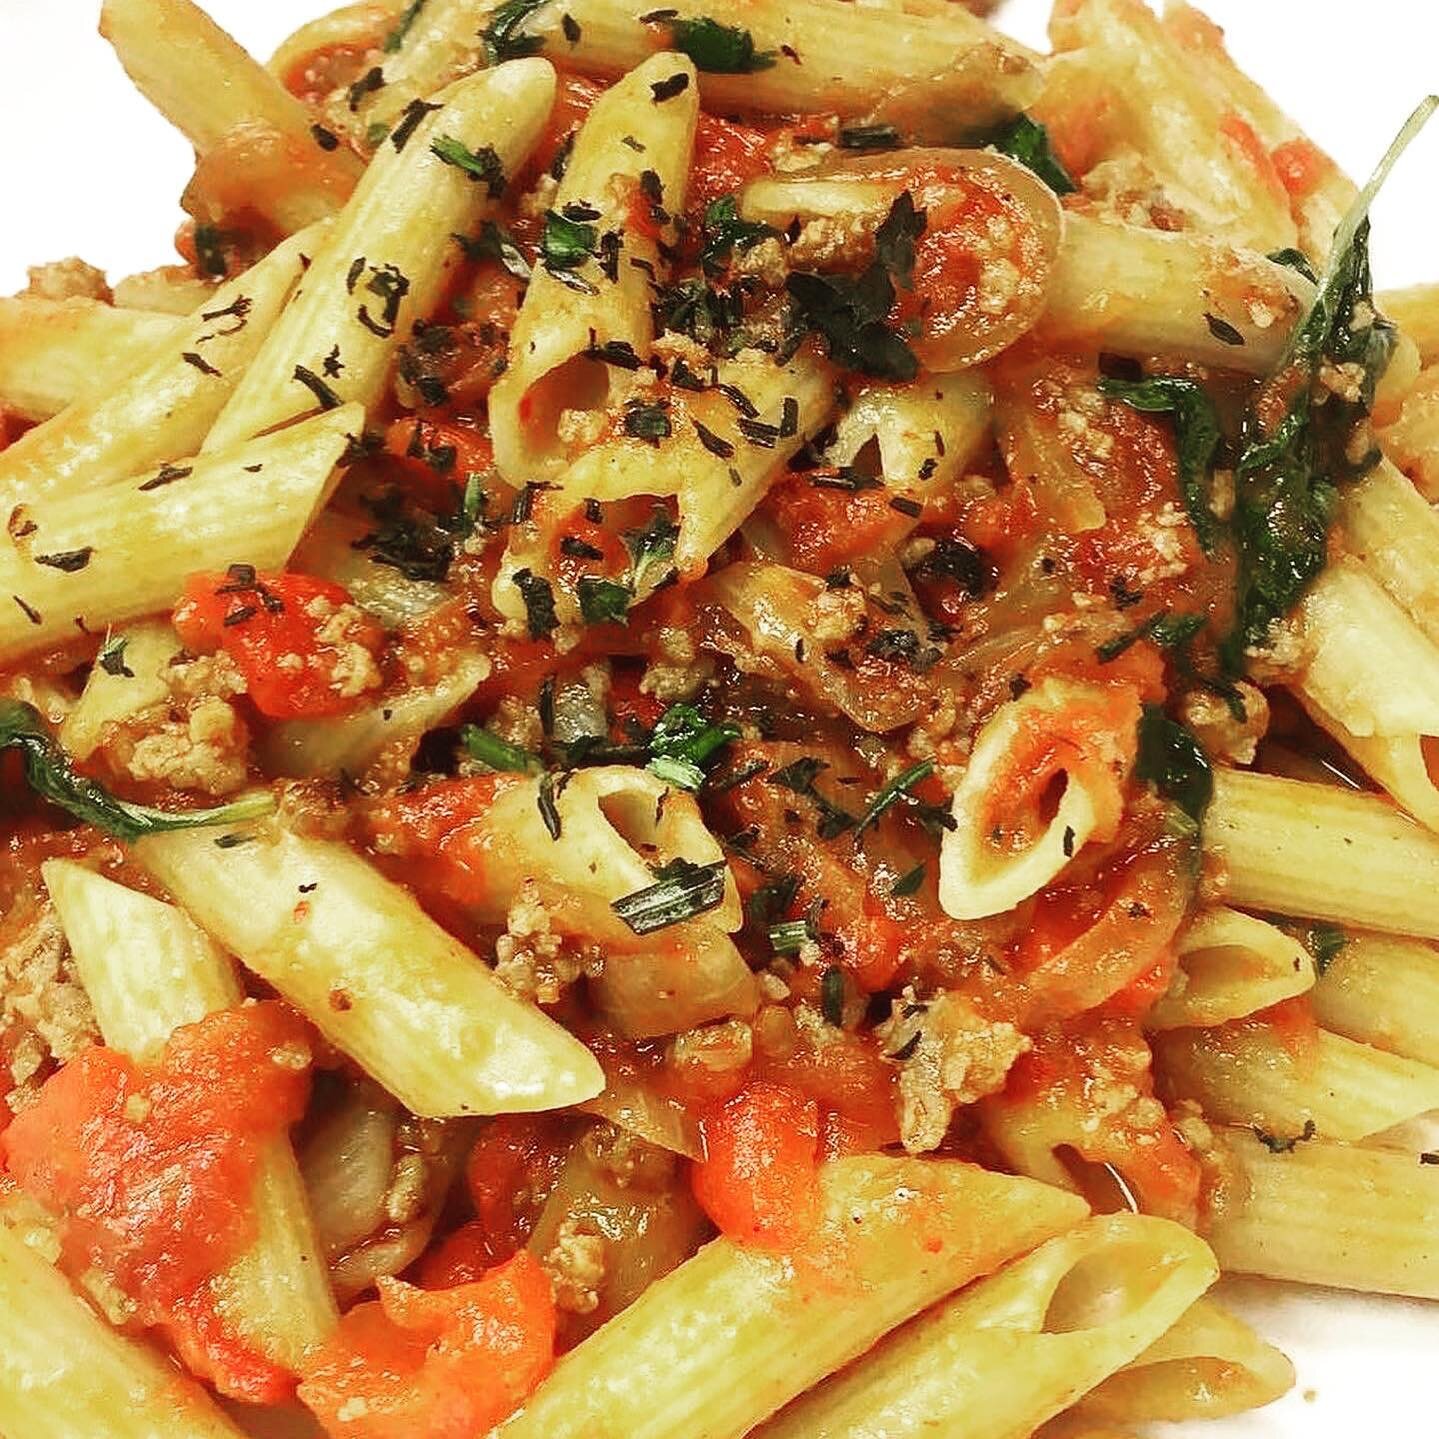 Our customers will tell you the Chicken Parmesan is their favorite pasta, but if you like a little spice in your life our Sausage Diavolo is simply delicious! 

~ Penne pasta tossed in spicy marinara sauce with italian sausage, roasted red peppers, c